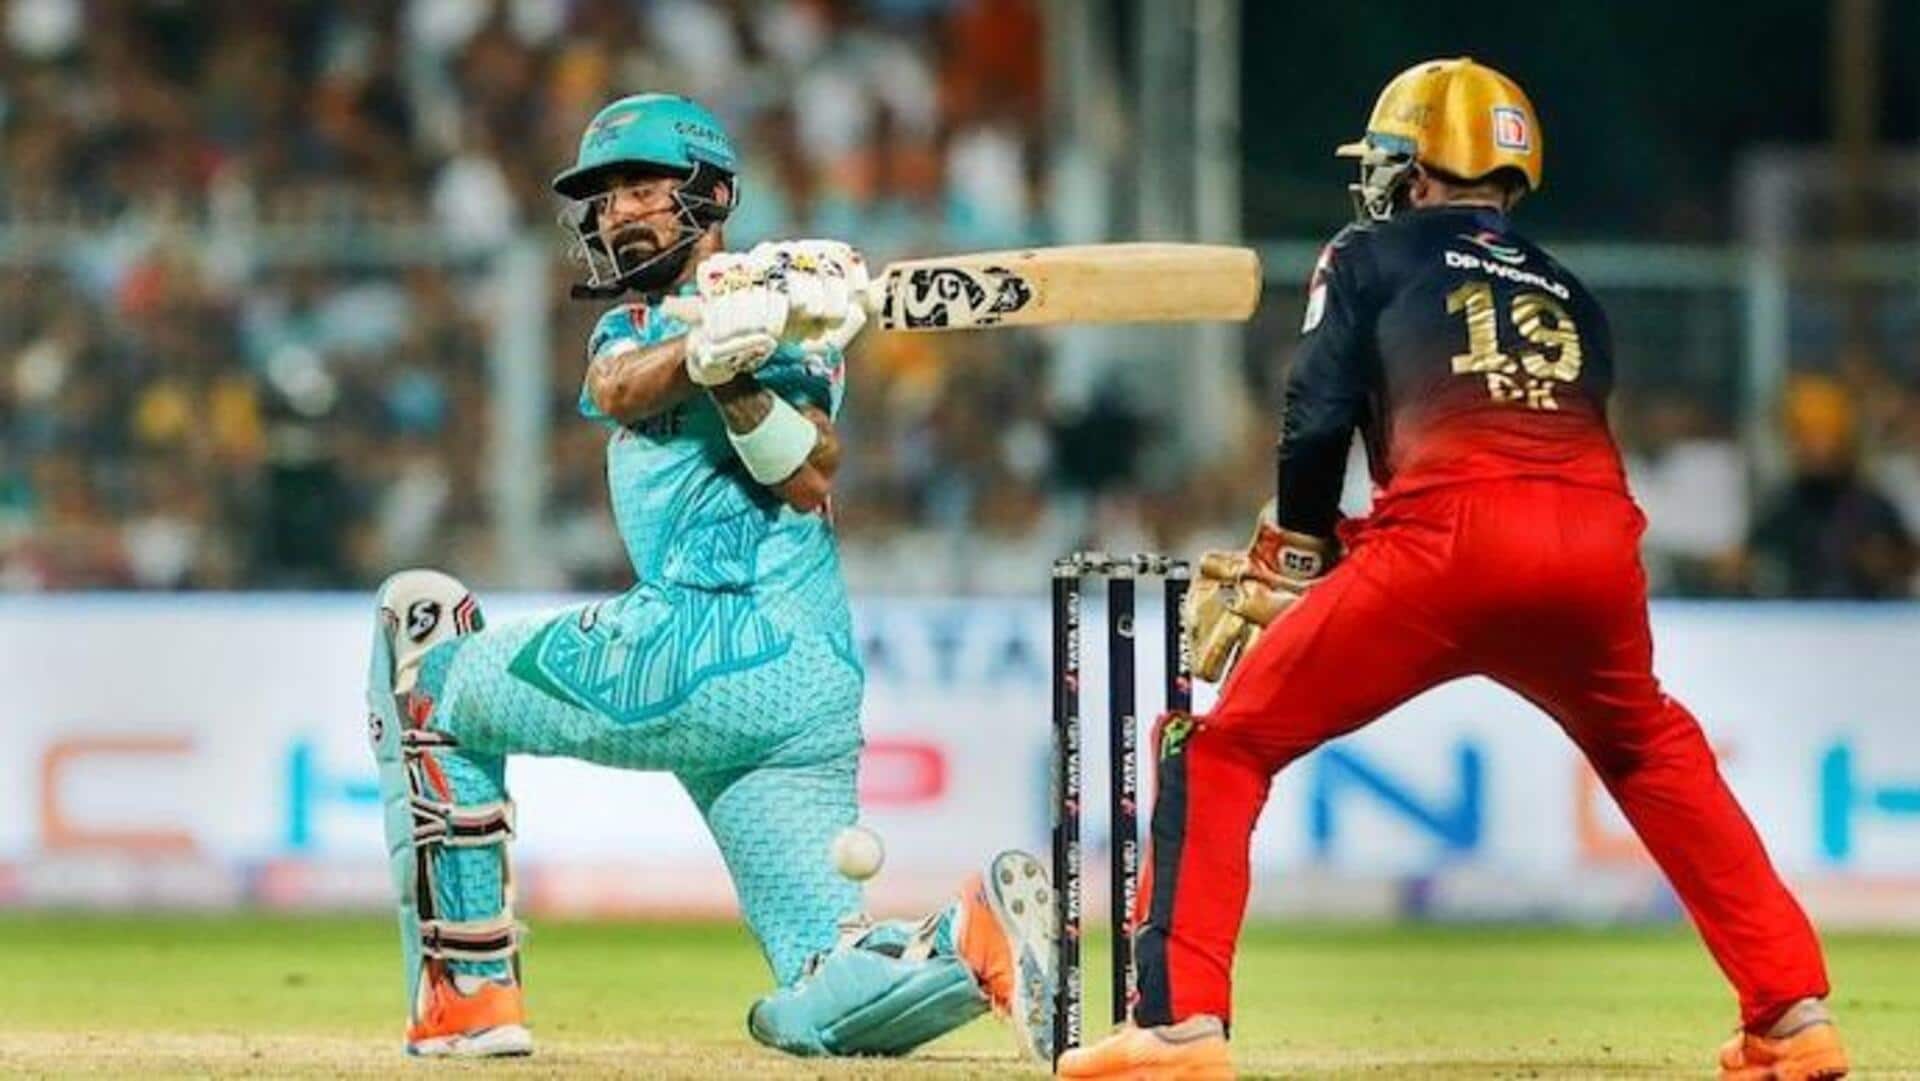 KL Rahul averages nearly 70 against RCB in IPL: Stats